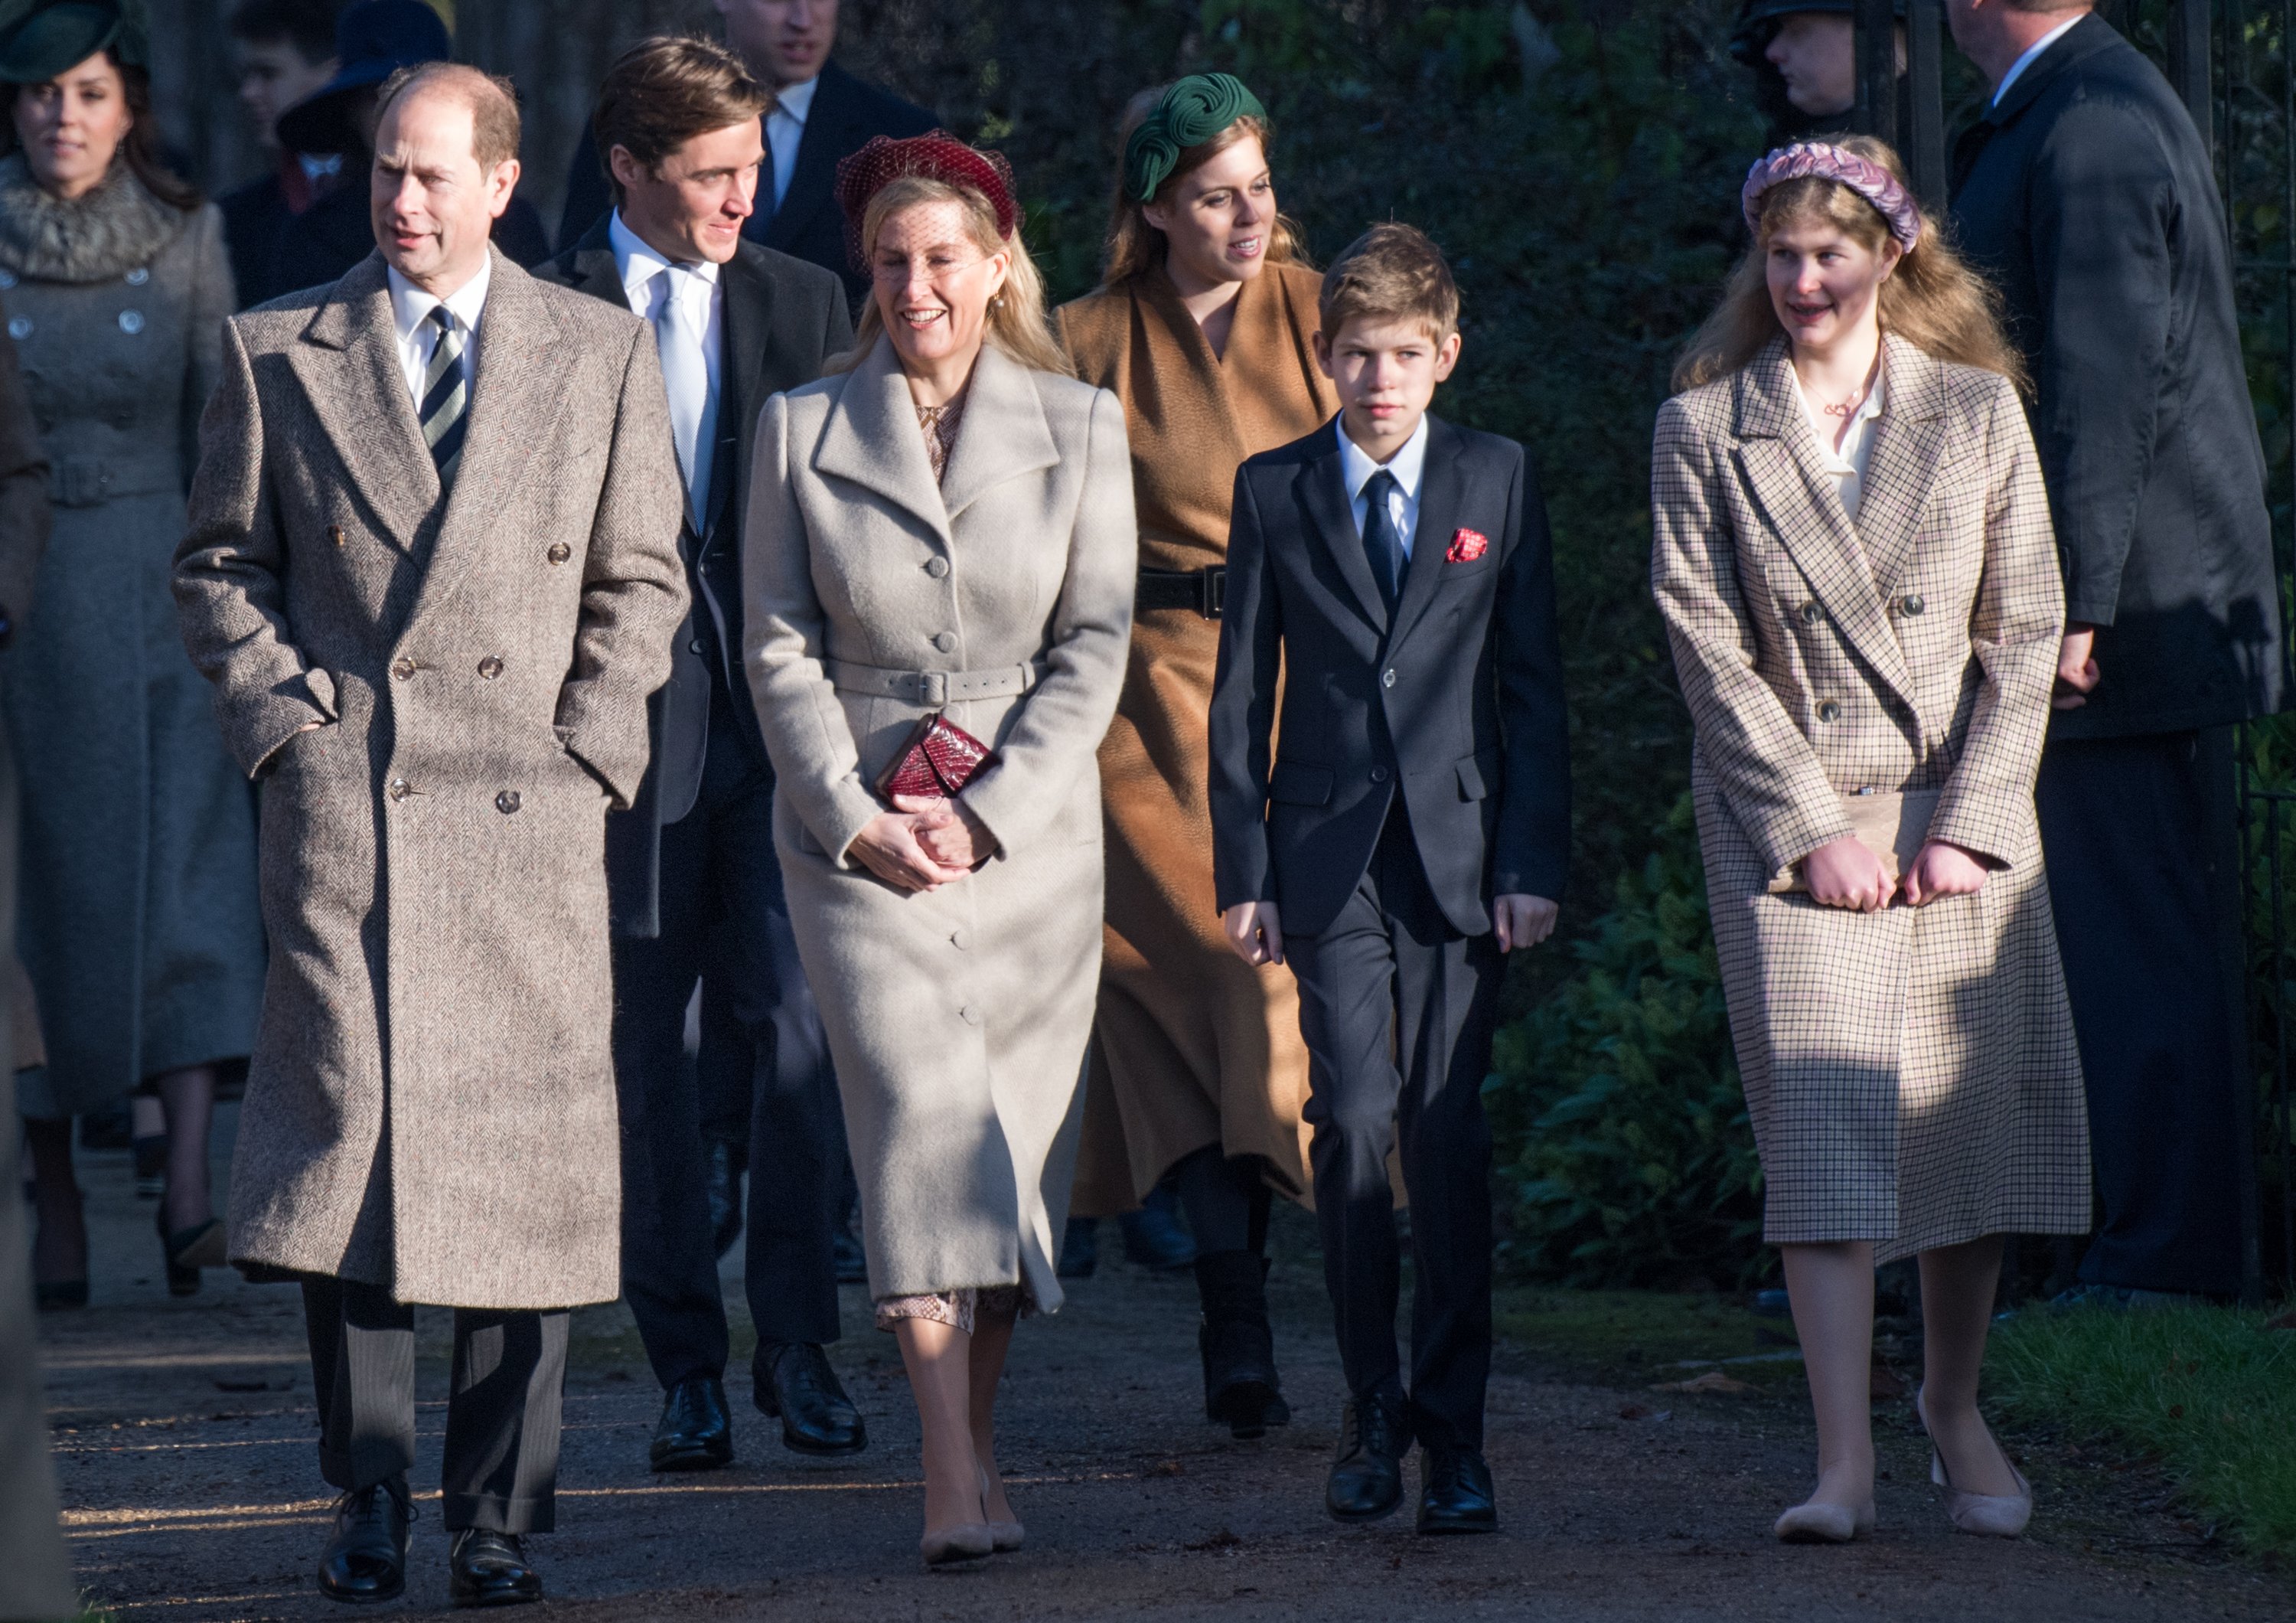 Prince Edward, Earl of Wessex and Sophie, Countess of Wessex with James Viscount Severn and Lady Louise Windsor at Sandringham Estate's Church of St. Mary Magdalene on December 25, 2019, in King's Lynn, United Kingdom. | Source: Getty Images